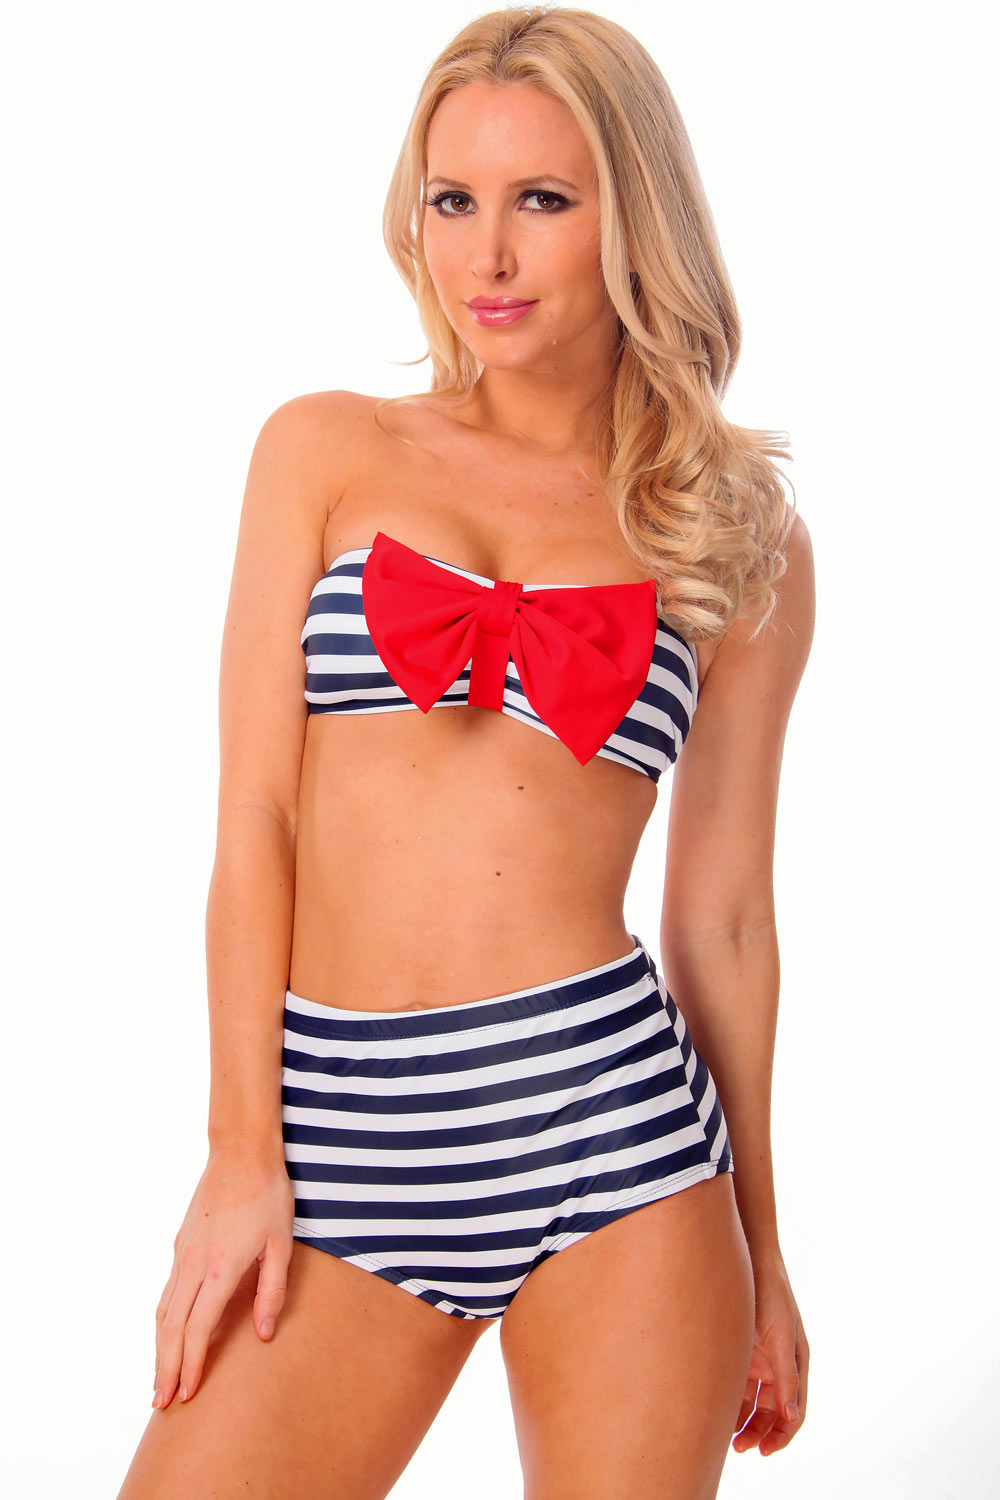 Sailor - High Wast Bottom Swimsuite